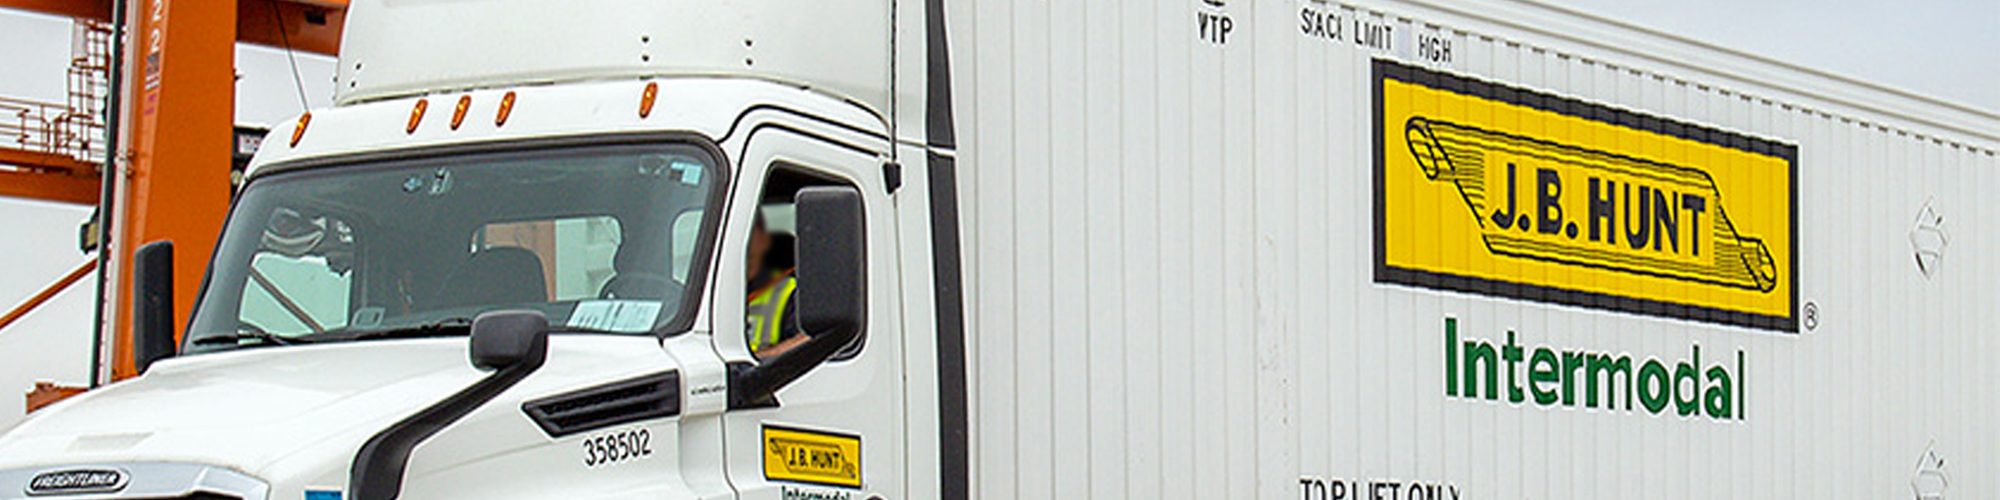 image of truck with J.B. Hunt Logo and Intermodal